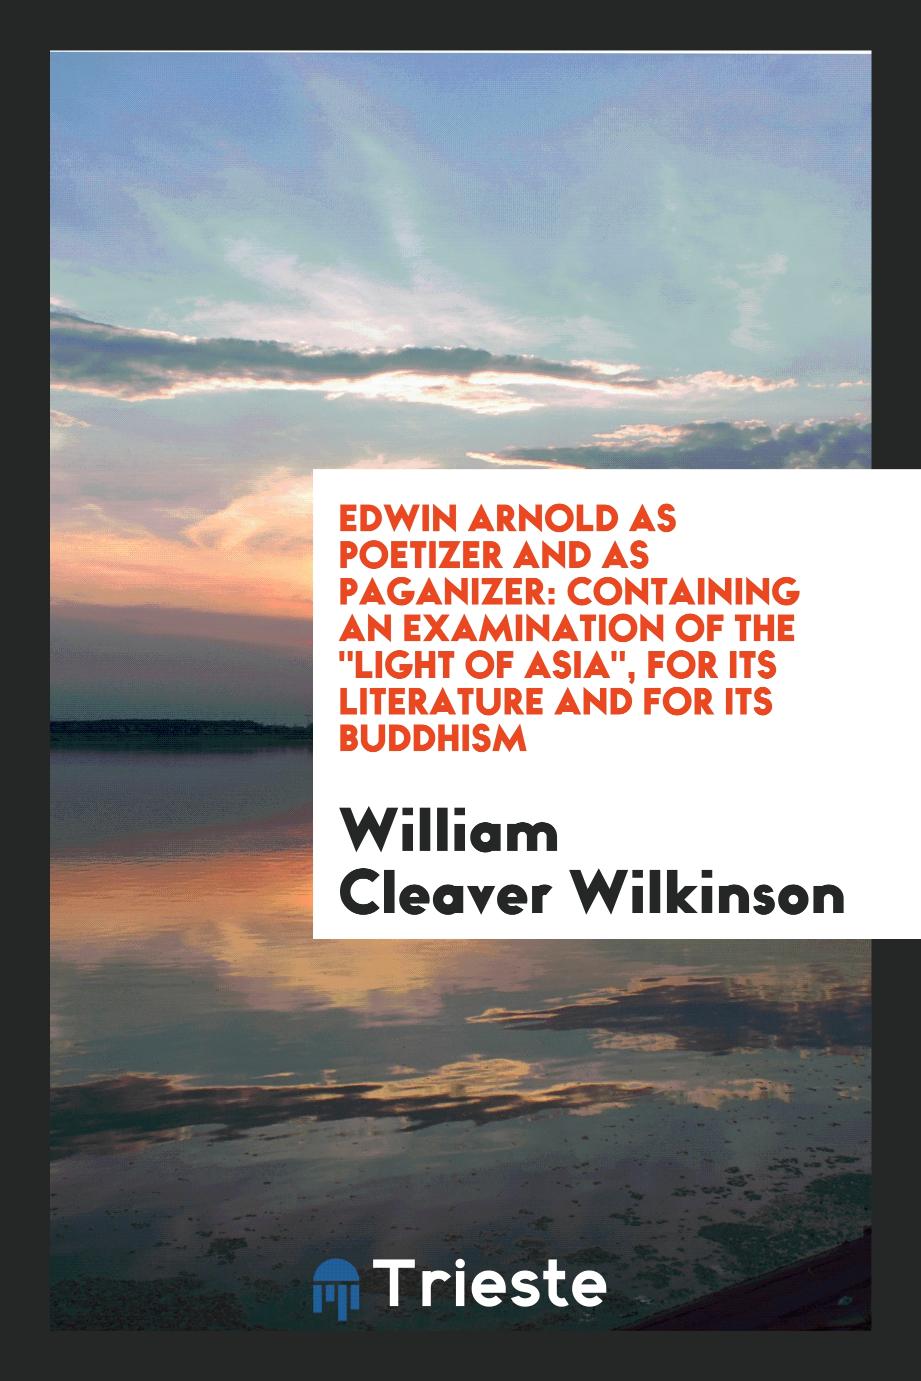 William Cleaver Wilkinson - Edwin Arnold as Poetizer and as Paganizer: Containing an Examination of The "Light of Asia", for Its Literature and for Its Buddhism